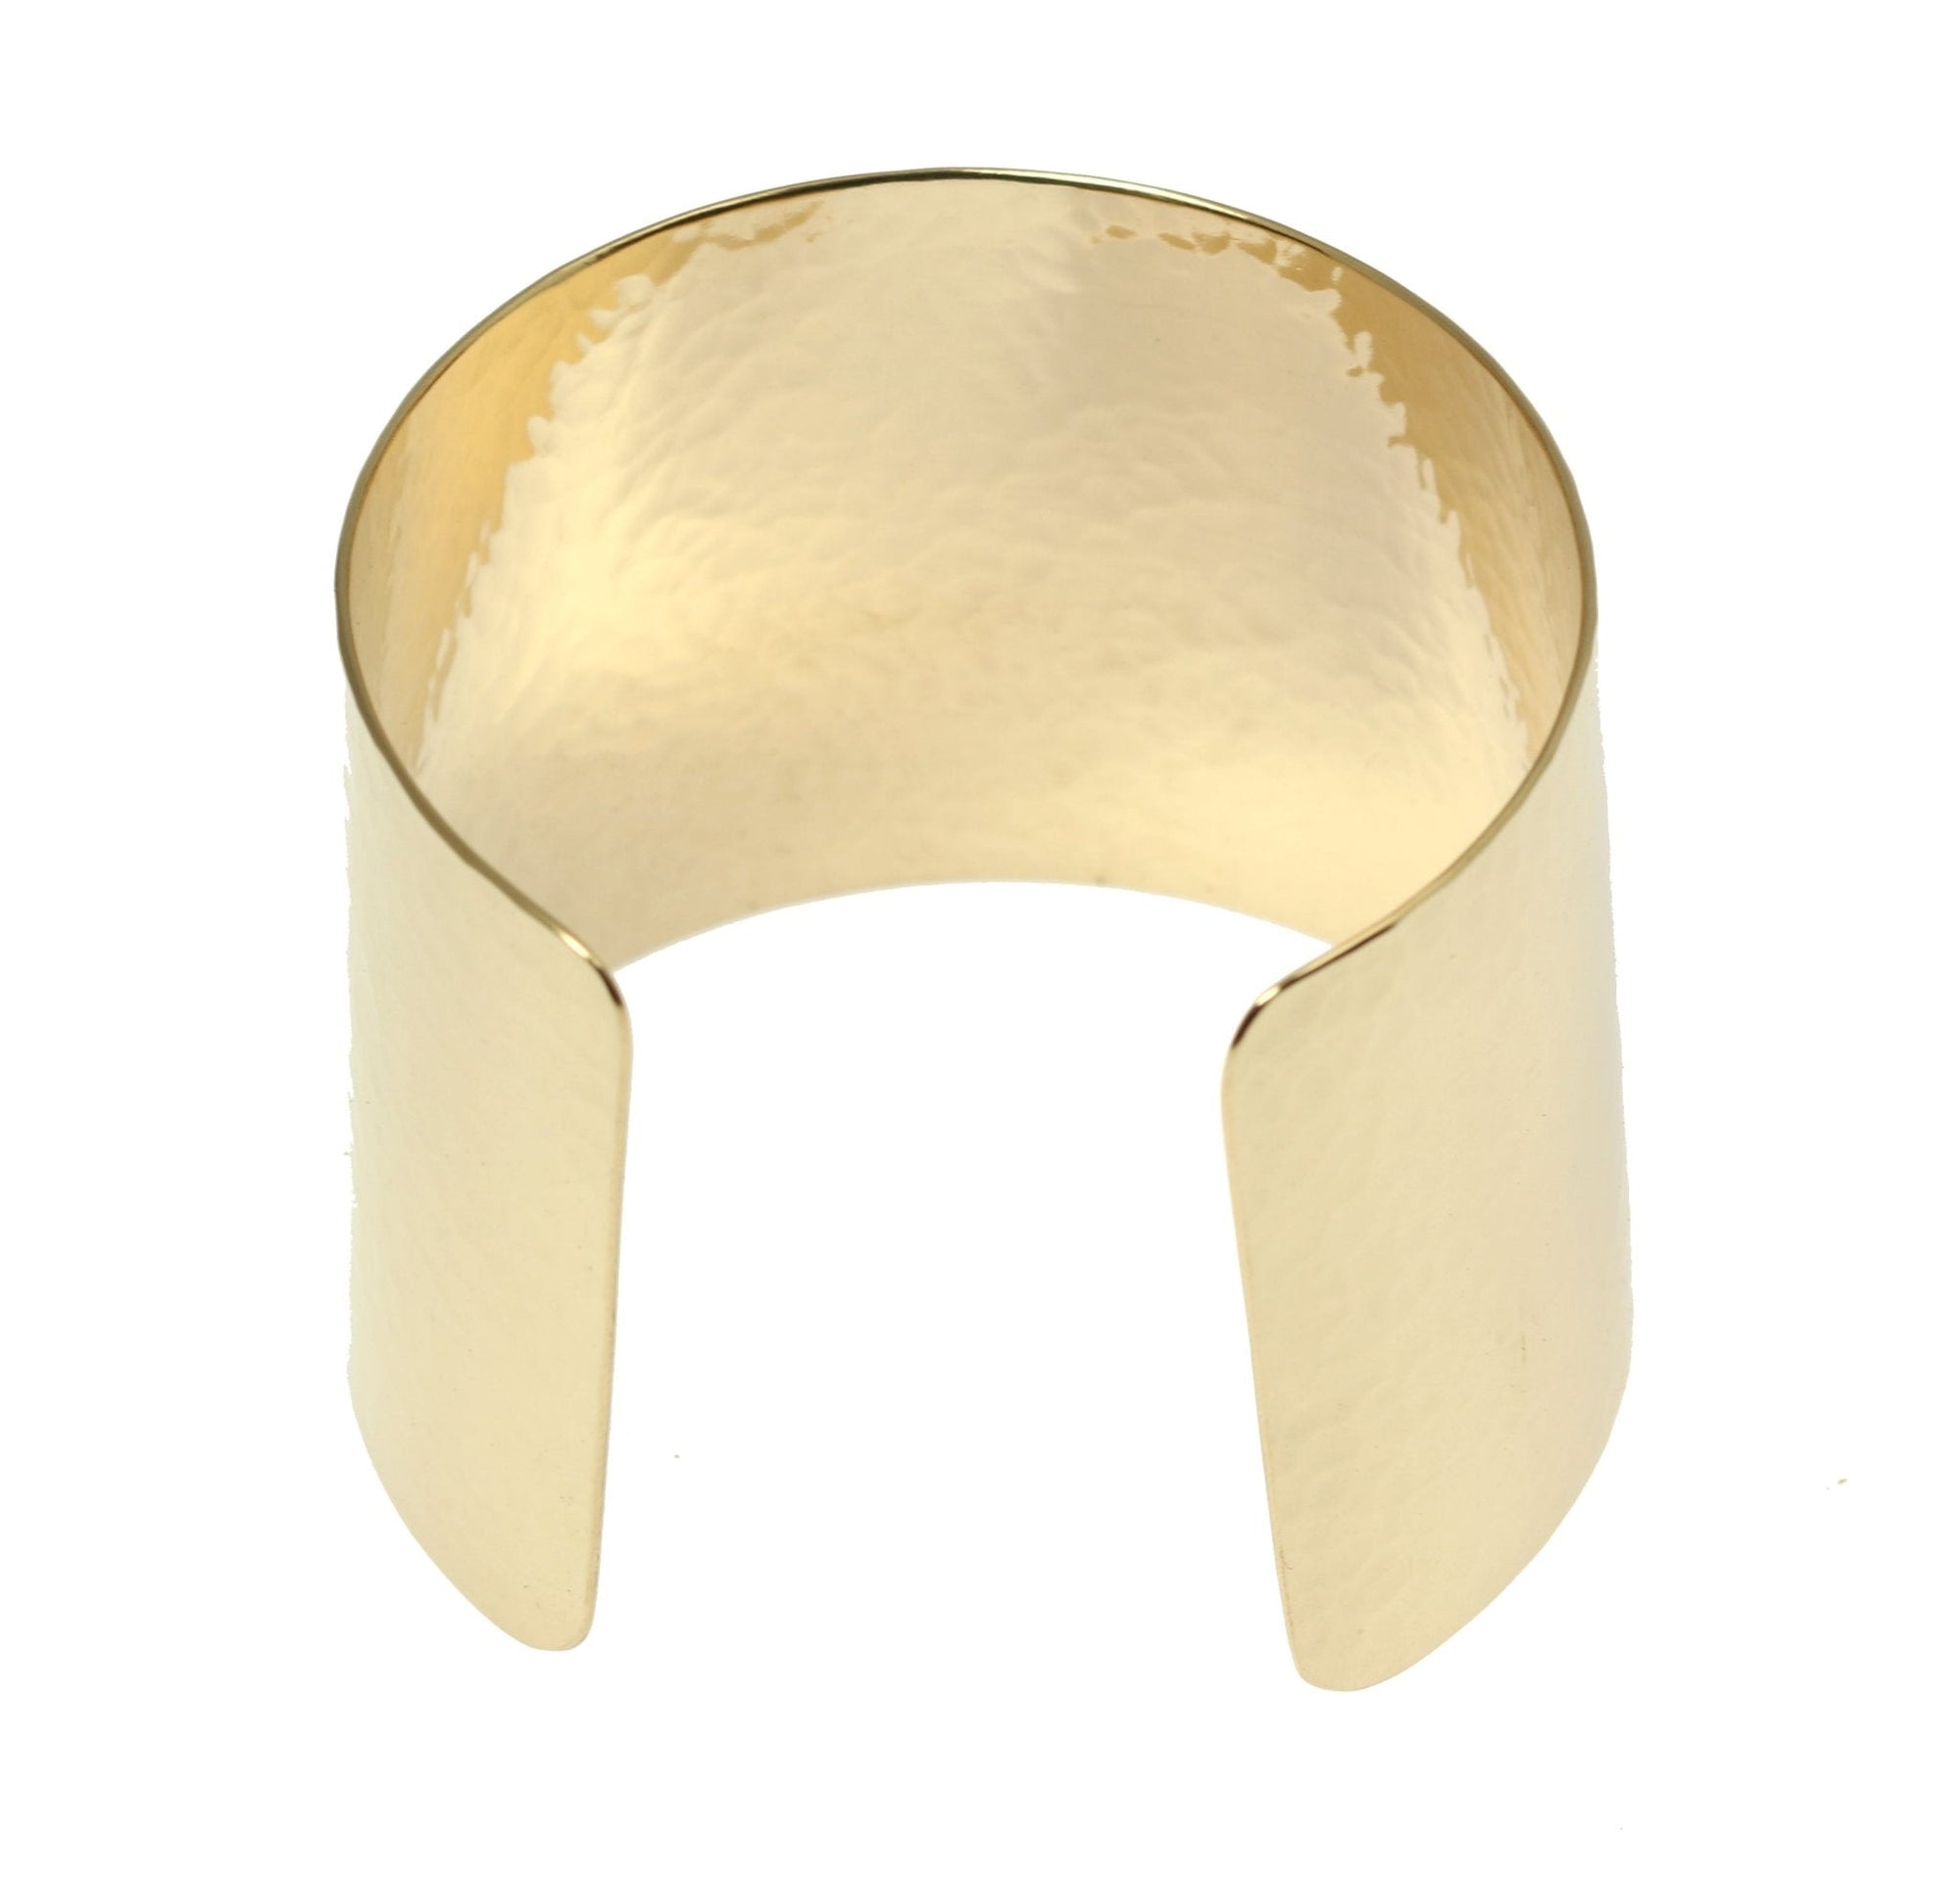 Hammered 14K Gold-filled Cuff Bracelet - Opening of Cuff